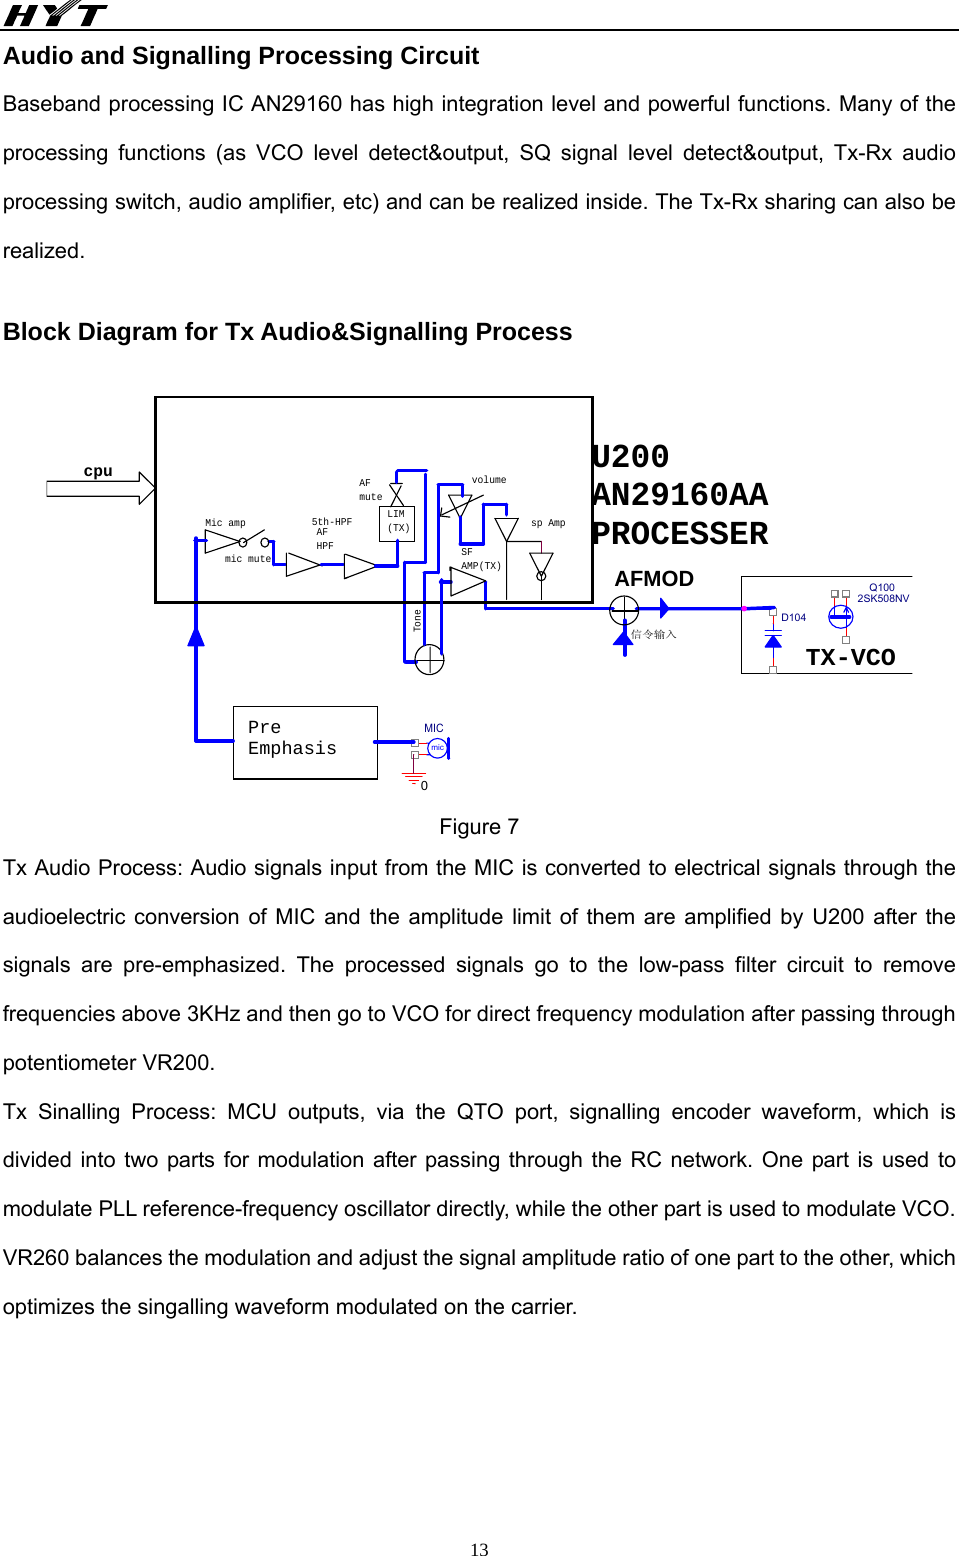                                                 13Audio and Signalling Processing Circuit Baseband processing IC AN29160 has high integration level and powerful functions. Many of the processing functions (as VCO level detect&amp;output, SQ signal level detect&amp;output, Tx-Rx audio processing switch, audio amplifier, etc) and can be realized inside. The Tx-Rx sharing can also be realized.  Block Diagram for Tx Audio&amp;Signalling Process  D104Q1002SK508NVTX-VCOcpuPreEmphasisSFAMP(TX)sp AmpToneAFMODMic ampU200AN29160AAPROCESSER信令输入AFHPF5th-HPFmicMICAFmutevolumemic muteLIM(TX)0 Figure 7 Tx Audio Process: Audio signals input from the MIC is converted to electrical signals through the audioelectric conversion of MIC and the amplitude limit of them are amplified by U200 after the signals are pre-emphasized. The processed signals go to the low-pass filter circuit to remove frequencies above 3KHz and then go to VCO for direct frequency modulation after passing through potentiometer VR200.   Tx Sinalling Process: MCU outputs, via the QTO port, signalling encoder waveform, which is divided into two parts for modulation after passing through the RC network. One part is used to modulate PLL reference-frequency oscillator directly, while the other part is used to modulate VCO.   VR260 balances the modulation and adjust the signal amplitude ratio of one part to the other, which optimizes the singalling waveform modulated on the carrier.     